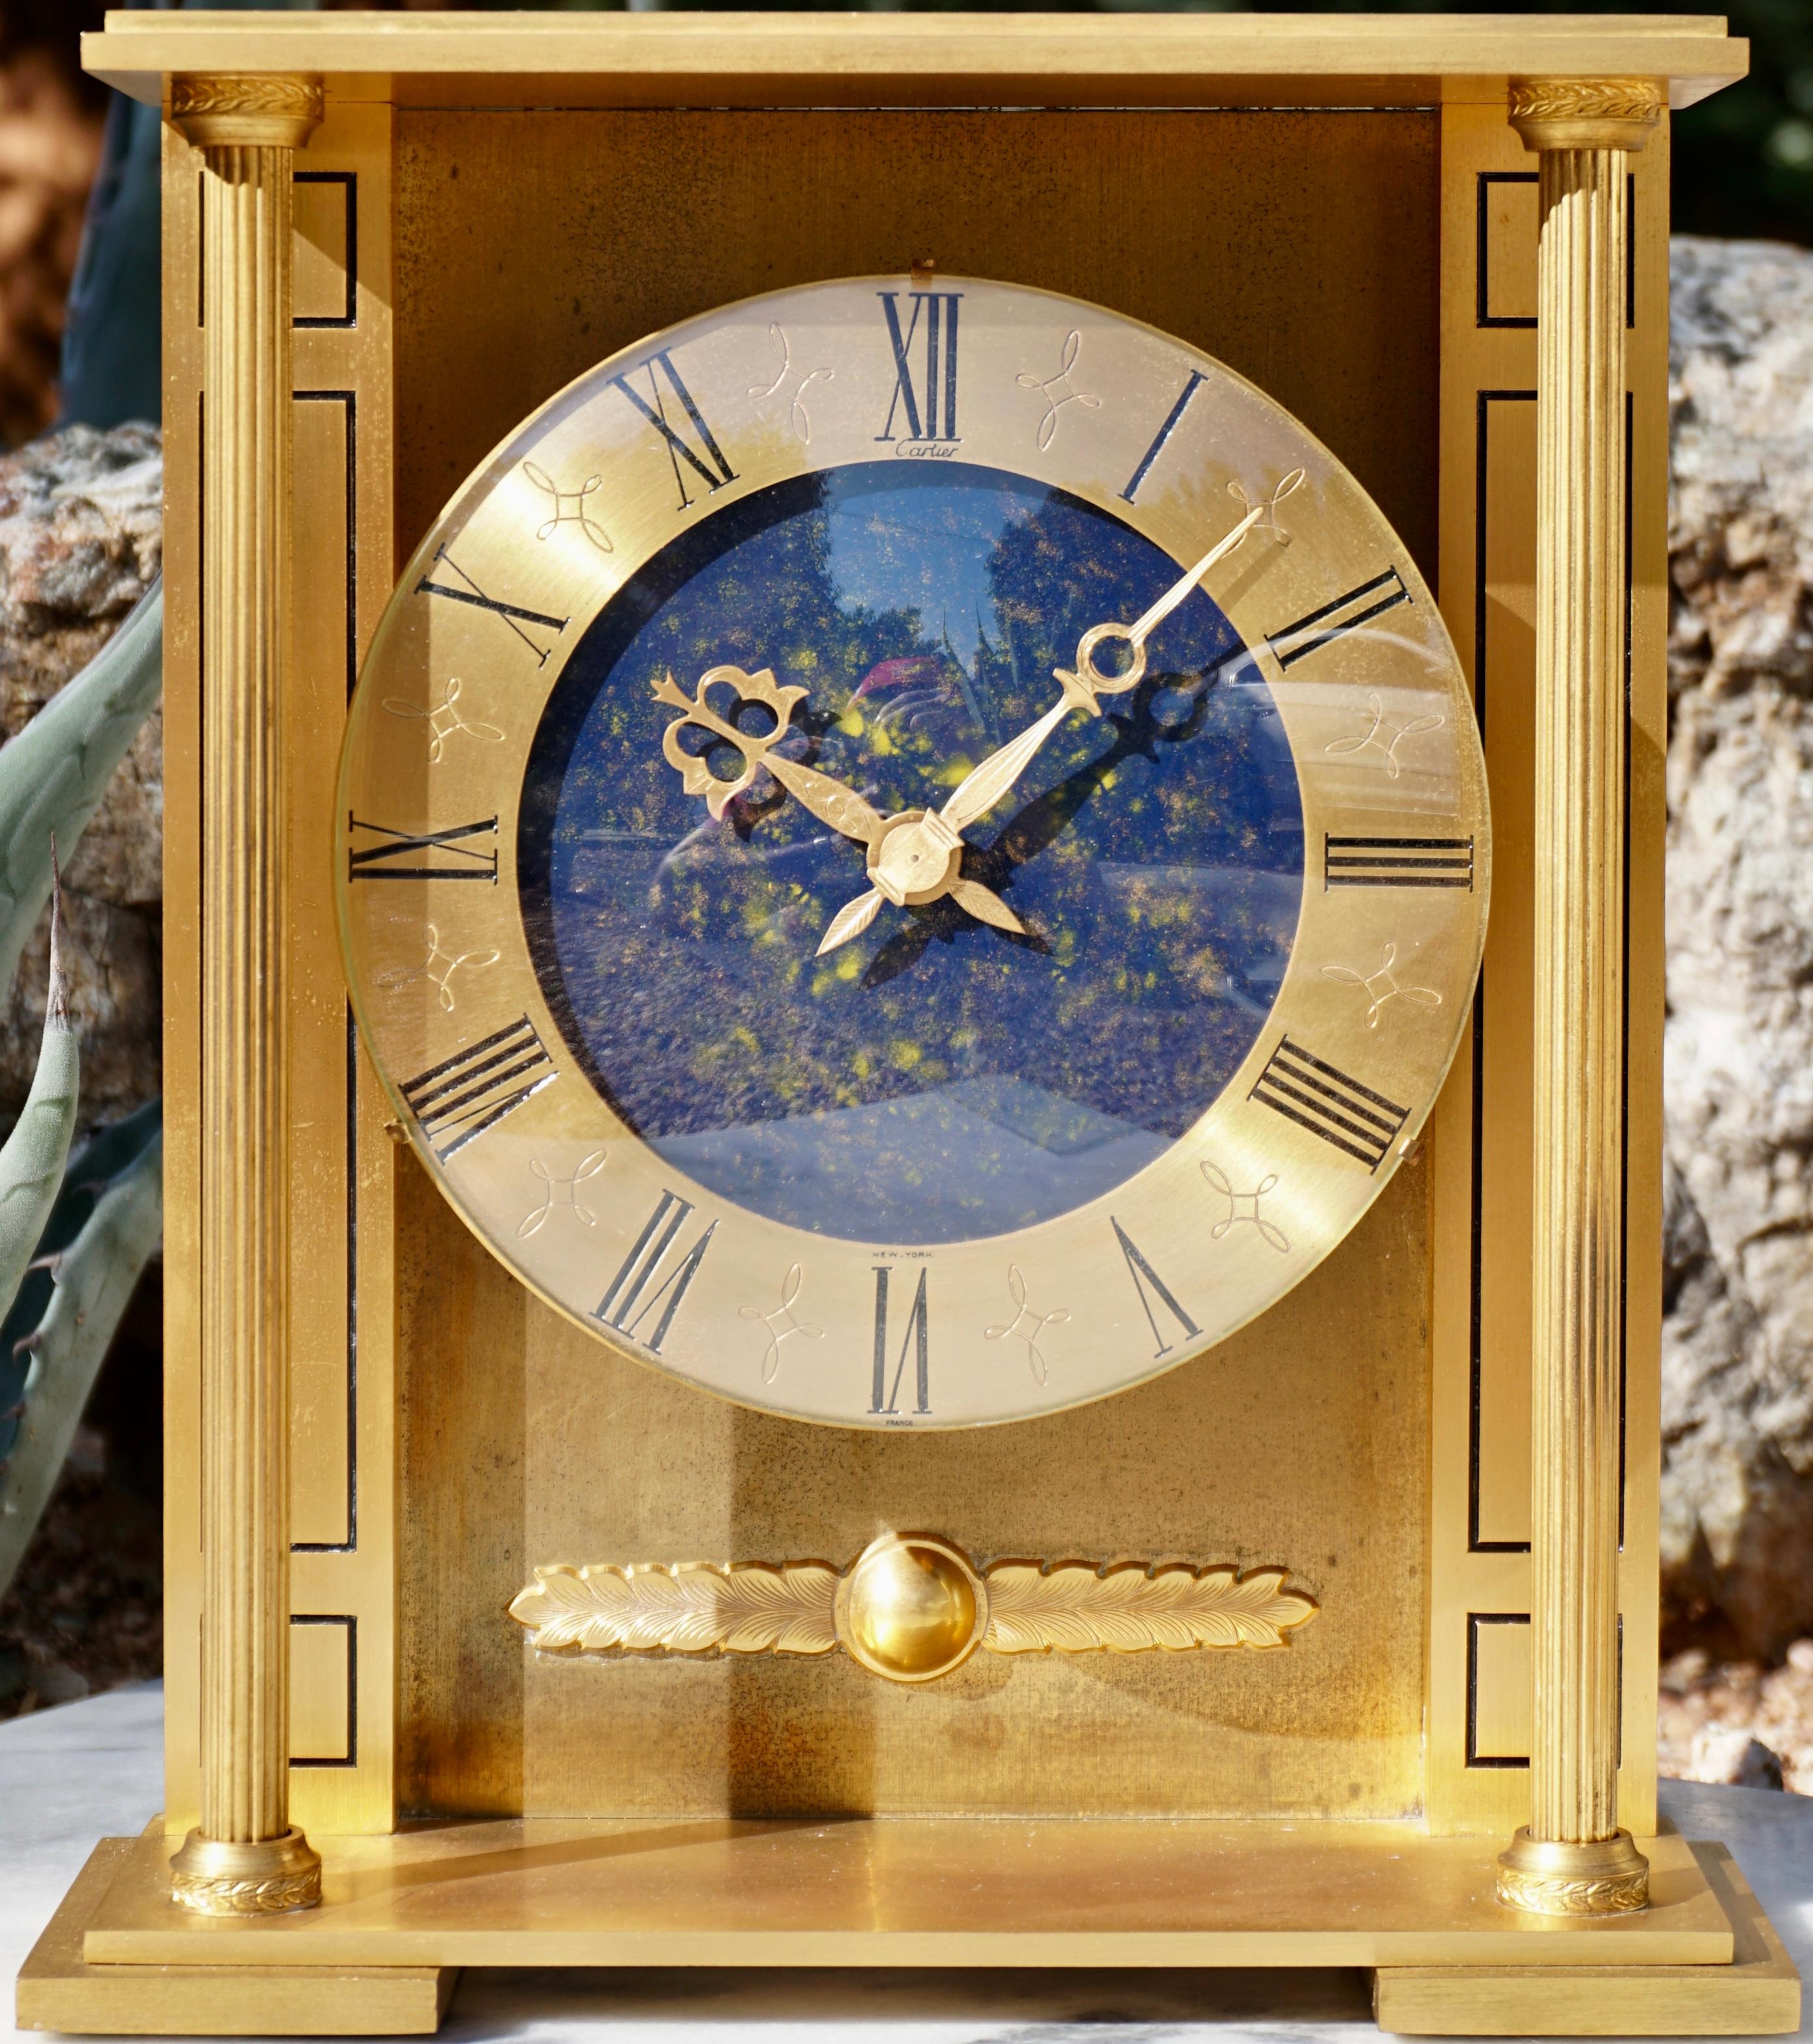 Expert craftsmanship! A rare and important Cartier mantle or desk clock of heavy gilt gold bronze with a polished Lapis Lazuli cobalt blue and yellow gold inclusions. Of classical carriage decorative design with columns and a Greek winged eye touch.